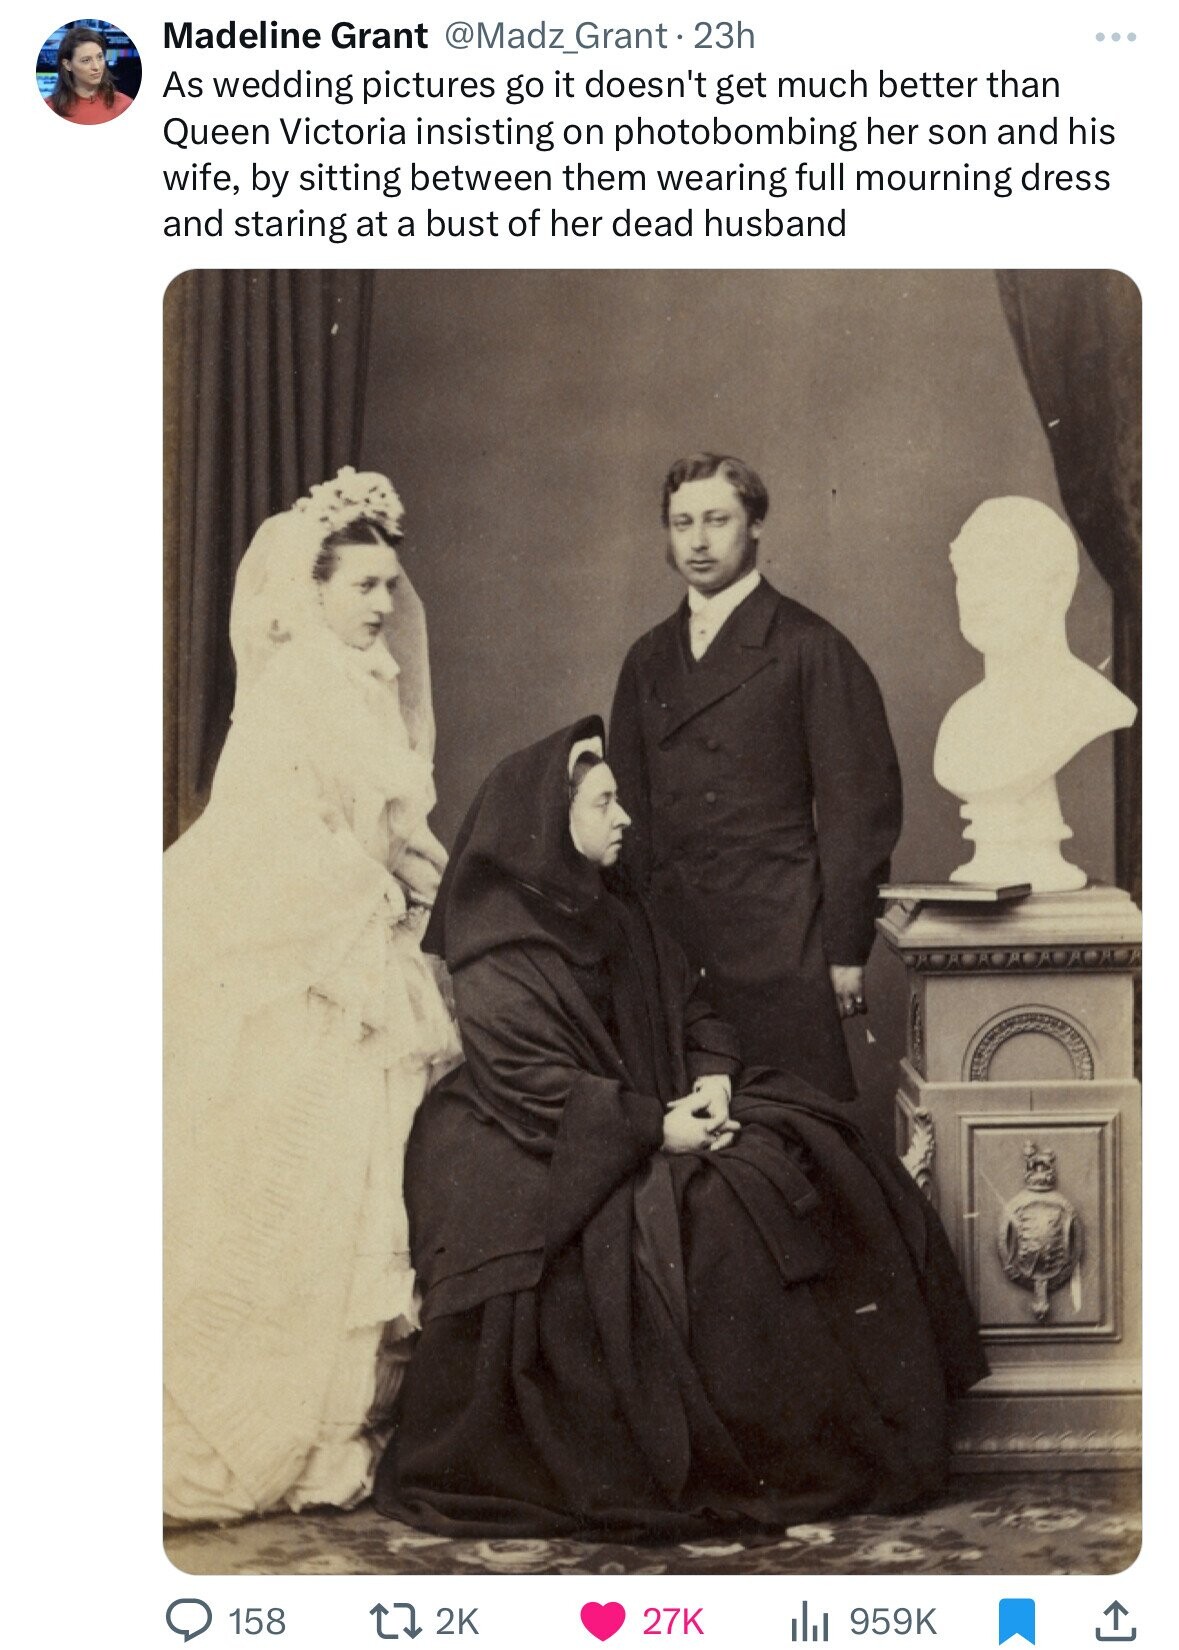 bertie and alexandra victoria - Madeline Grant . 23h As wedding pictures go it doesn't get much better than Queen Victoria insisting on photobombing her son and his wife, by sitting between them wearing full mourning dress and staring at a bust of her dea